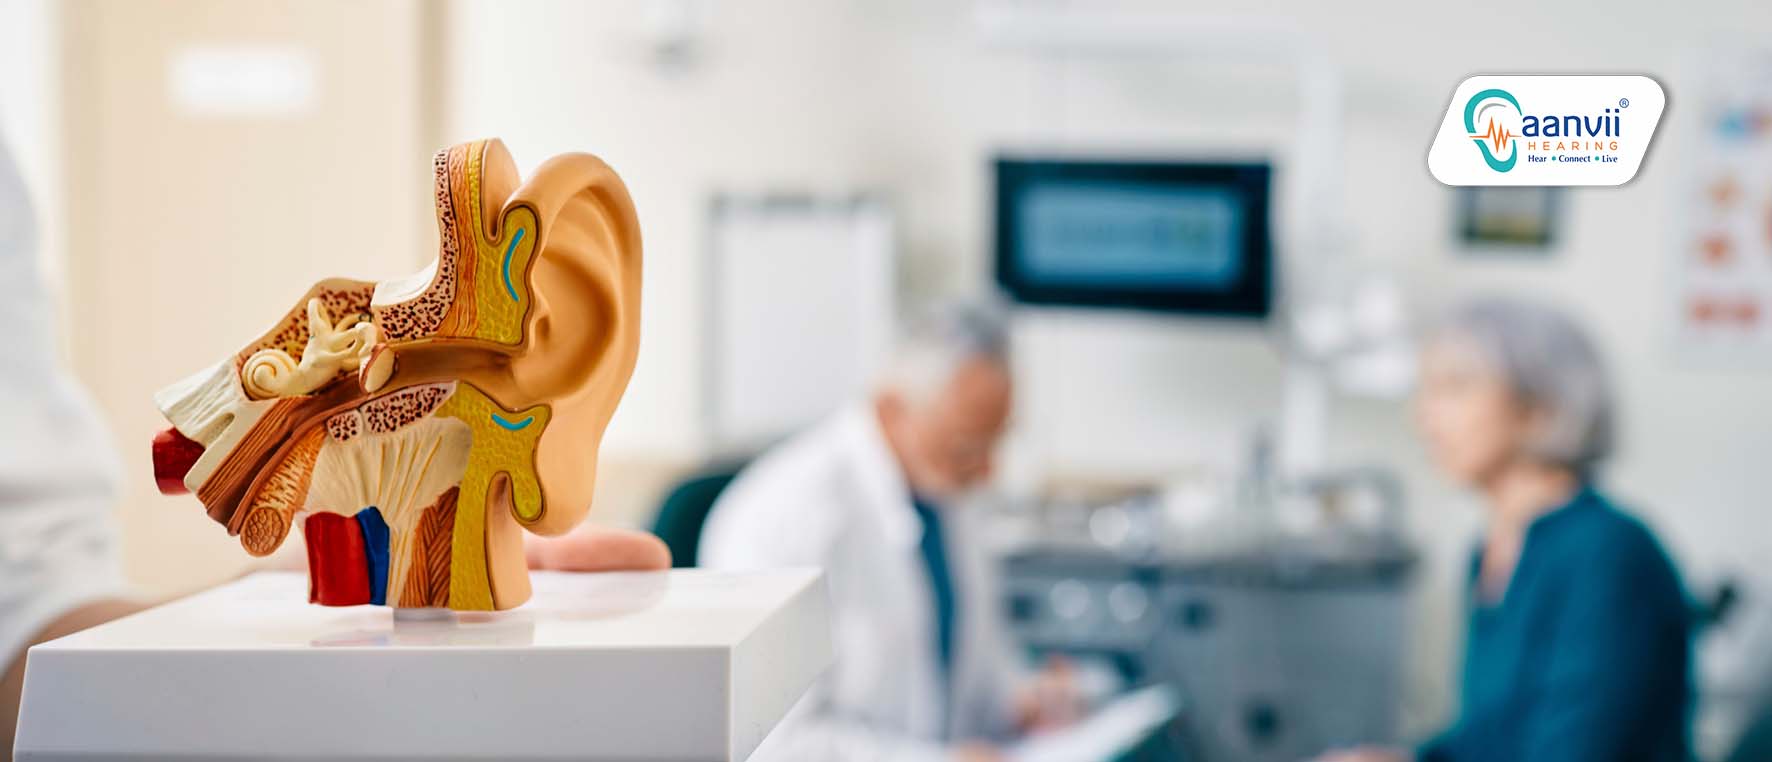 Can hearing loss affect mental health? | Aanvii Hearing